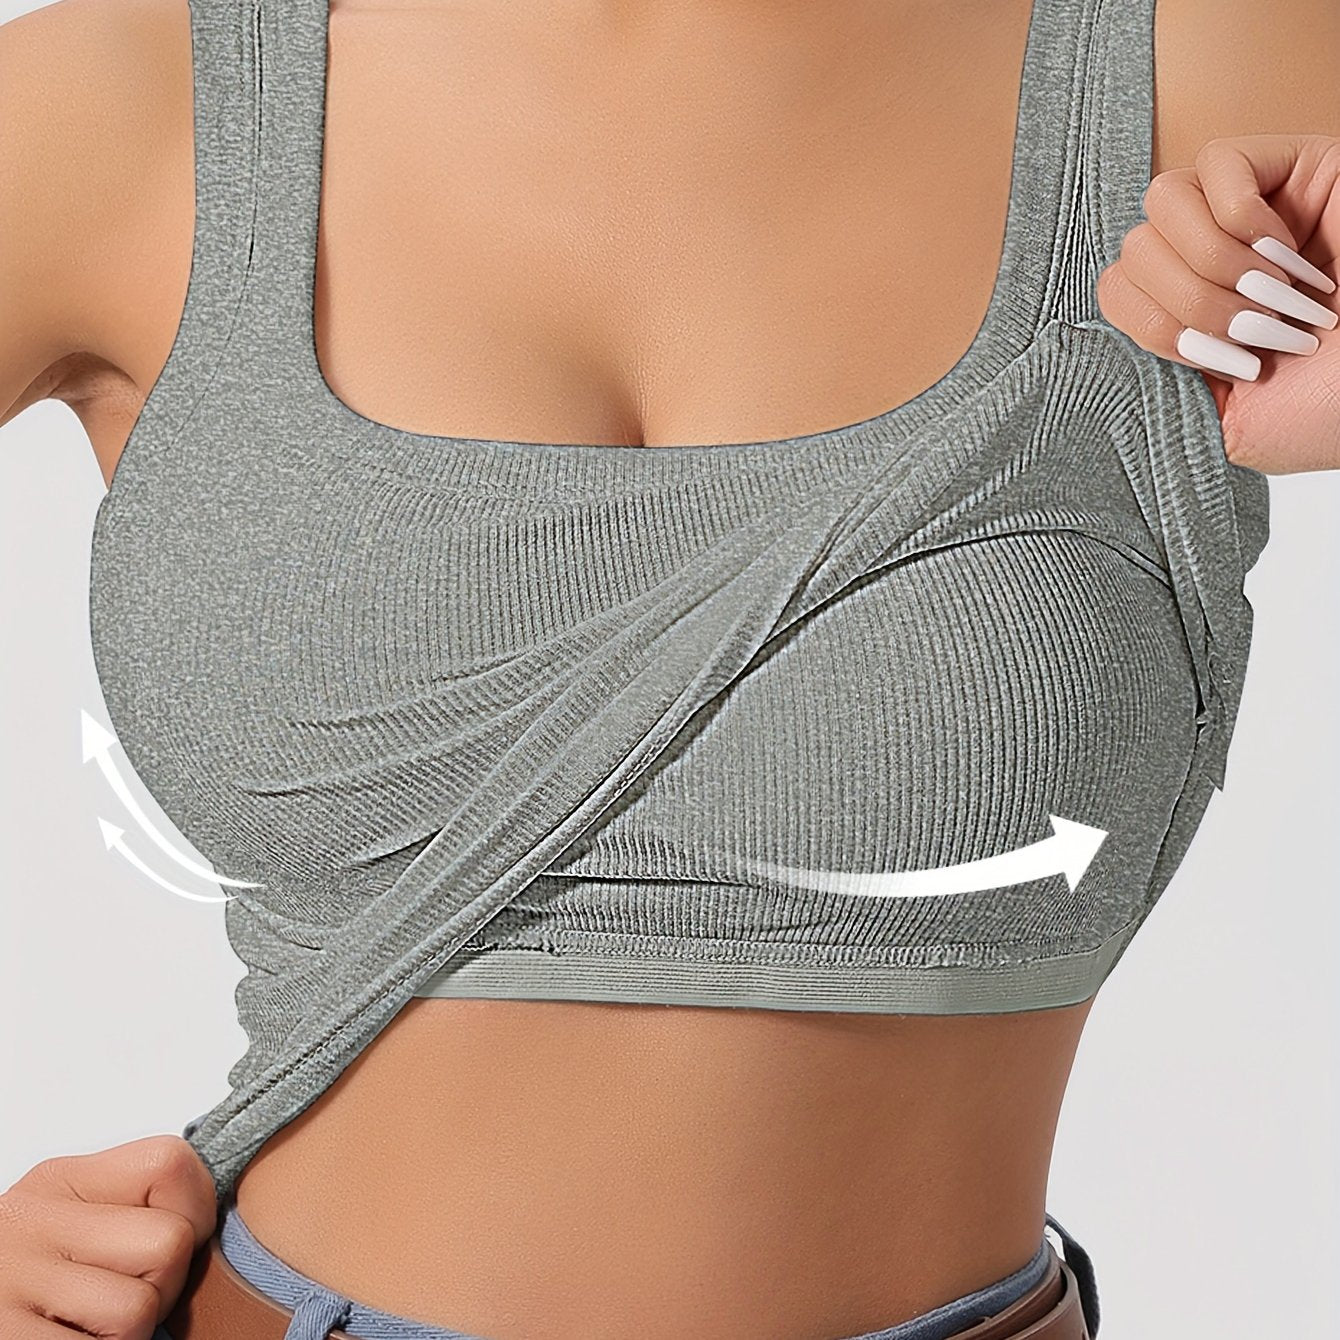 All-Season Slim-Fit Women's Tank Top - Casual High-Stretch Knit, Versatile Solid Color, Comfort with Detachable Chest Pad